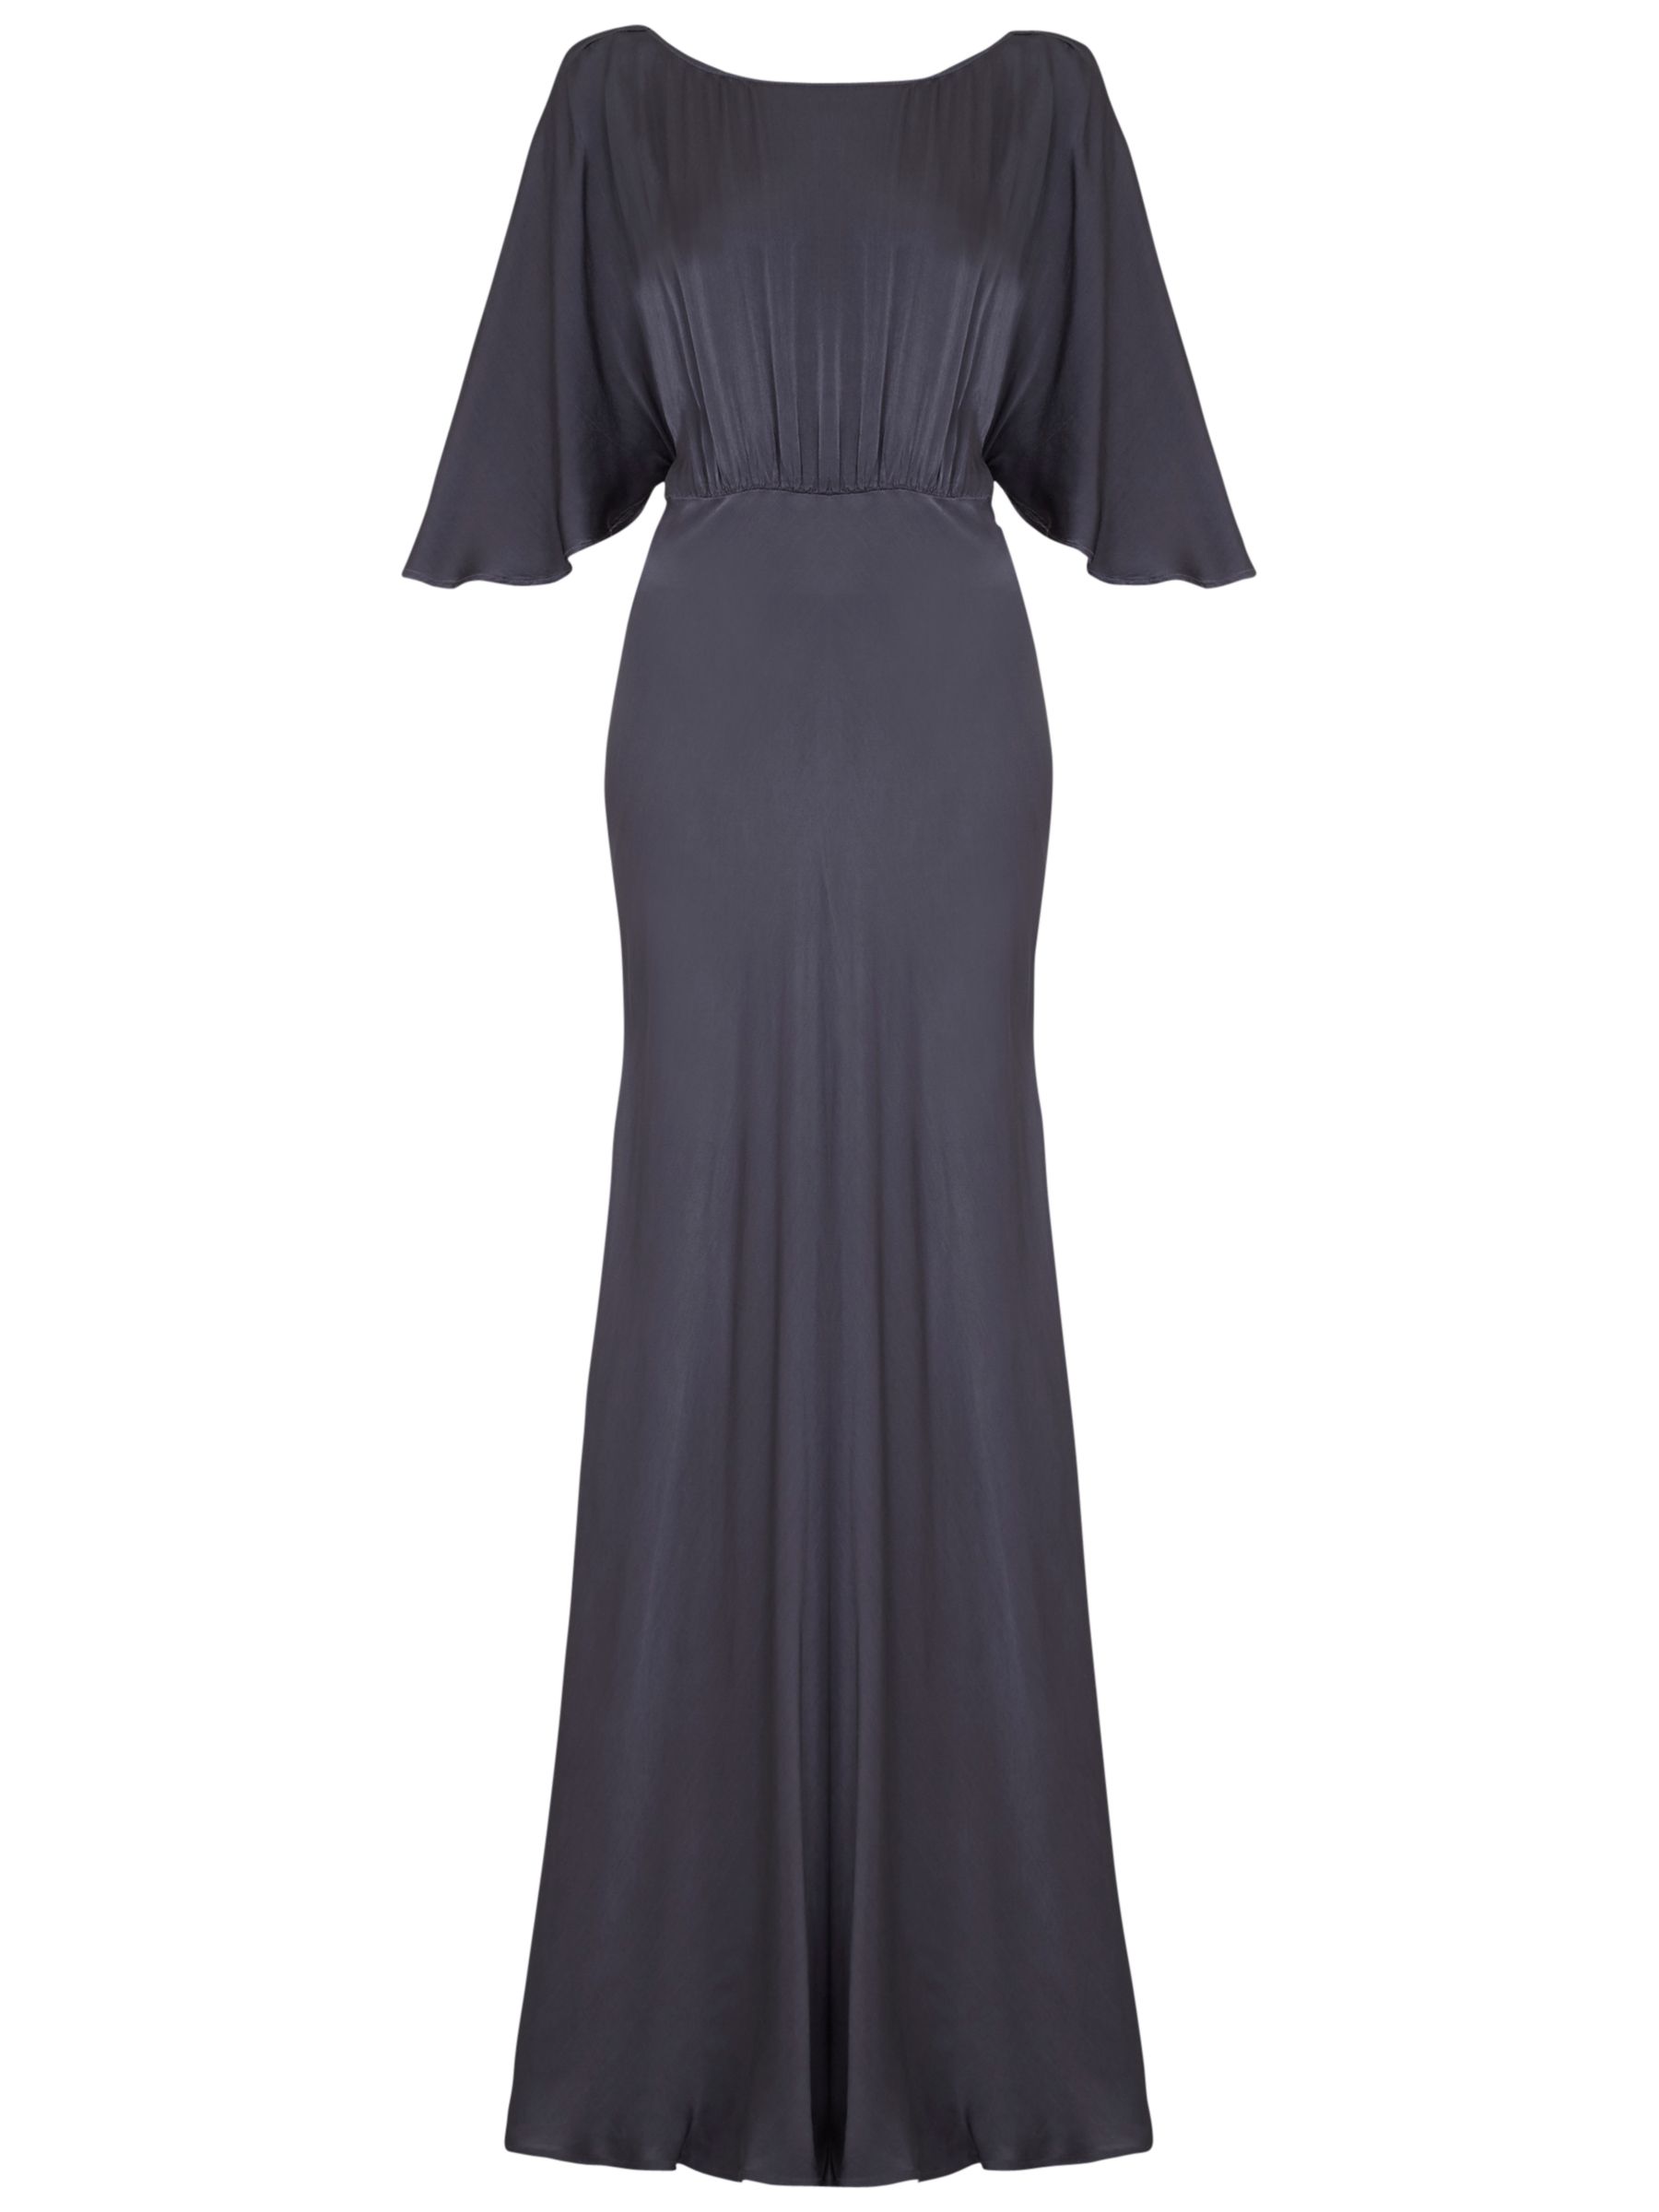 Ghost Gaby Dress, Charcoal at John Lewis & Partners